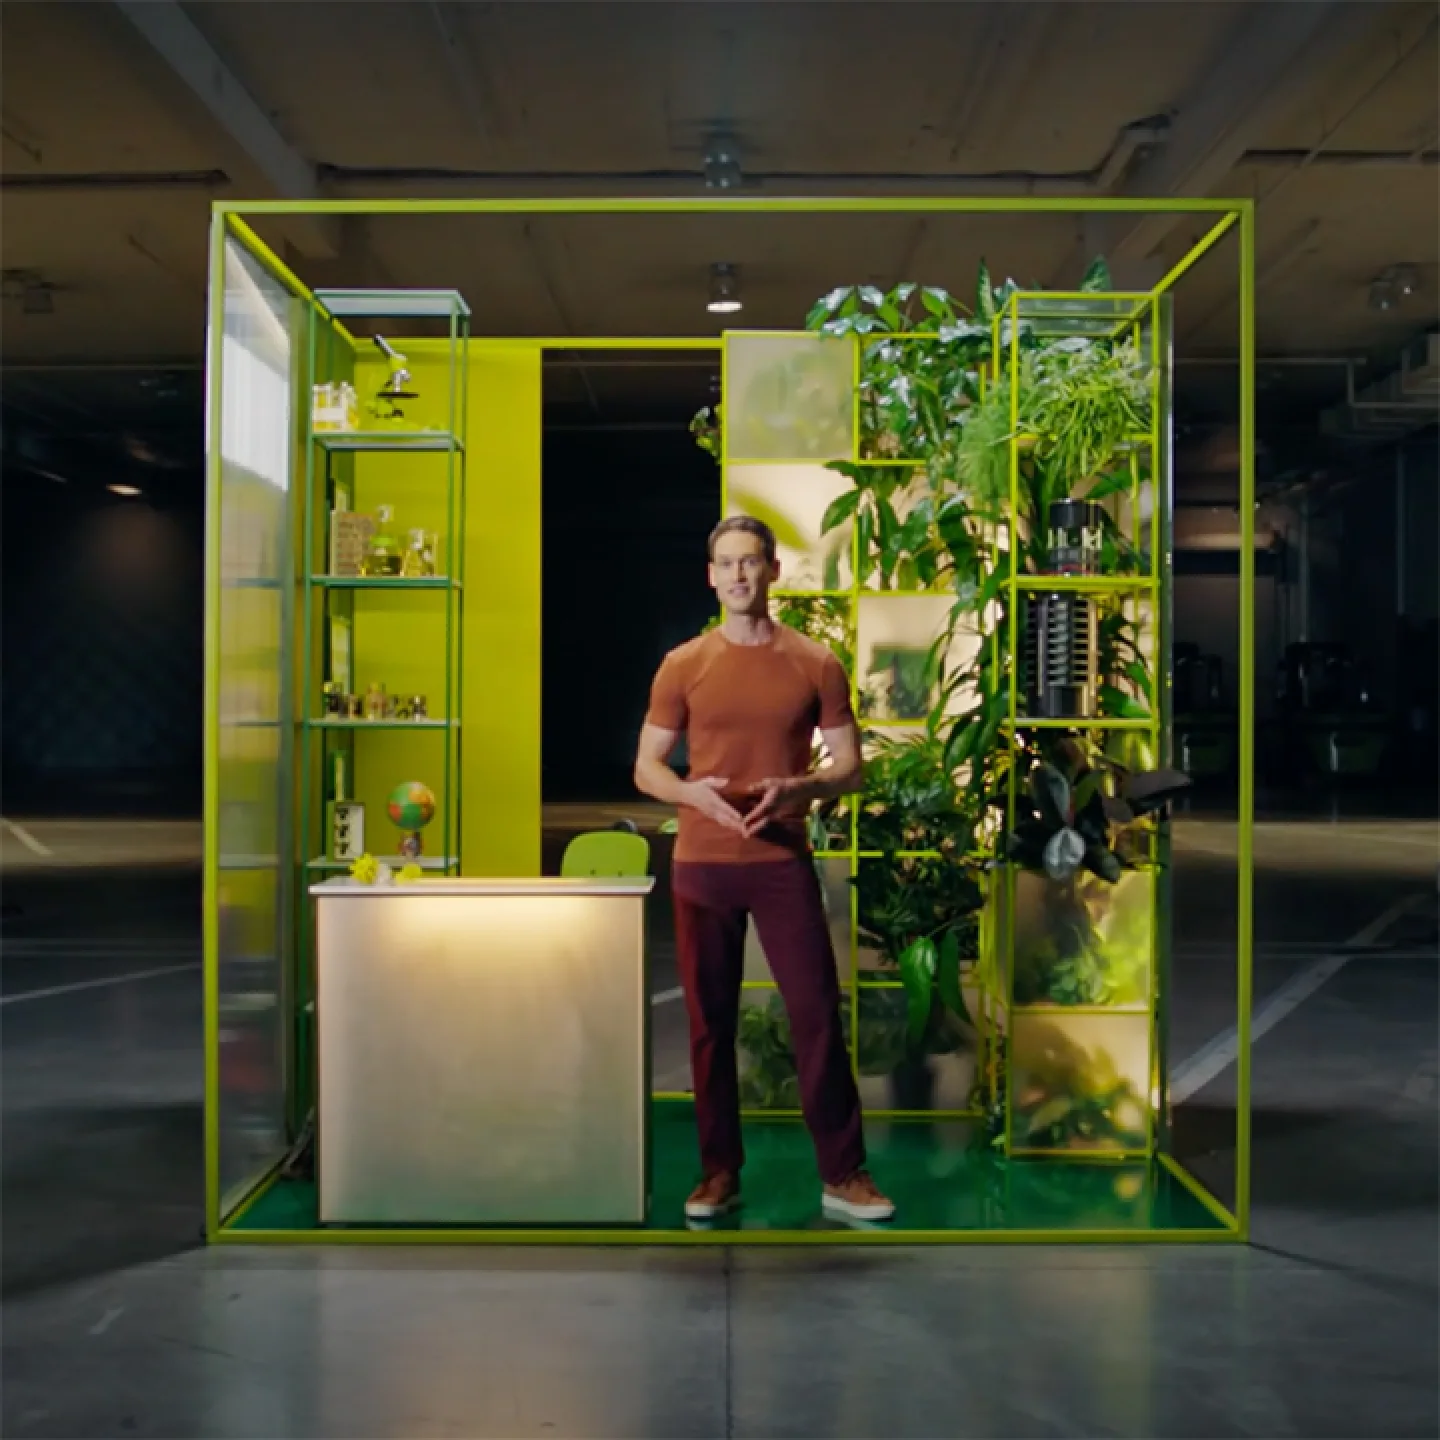 Thumbnail for a video, a man is seen in a greenhouse-like box in a studio setting.